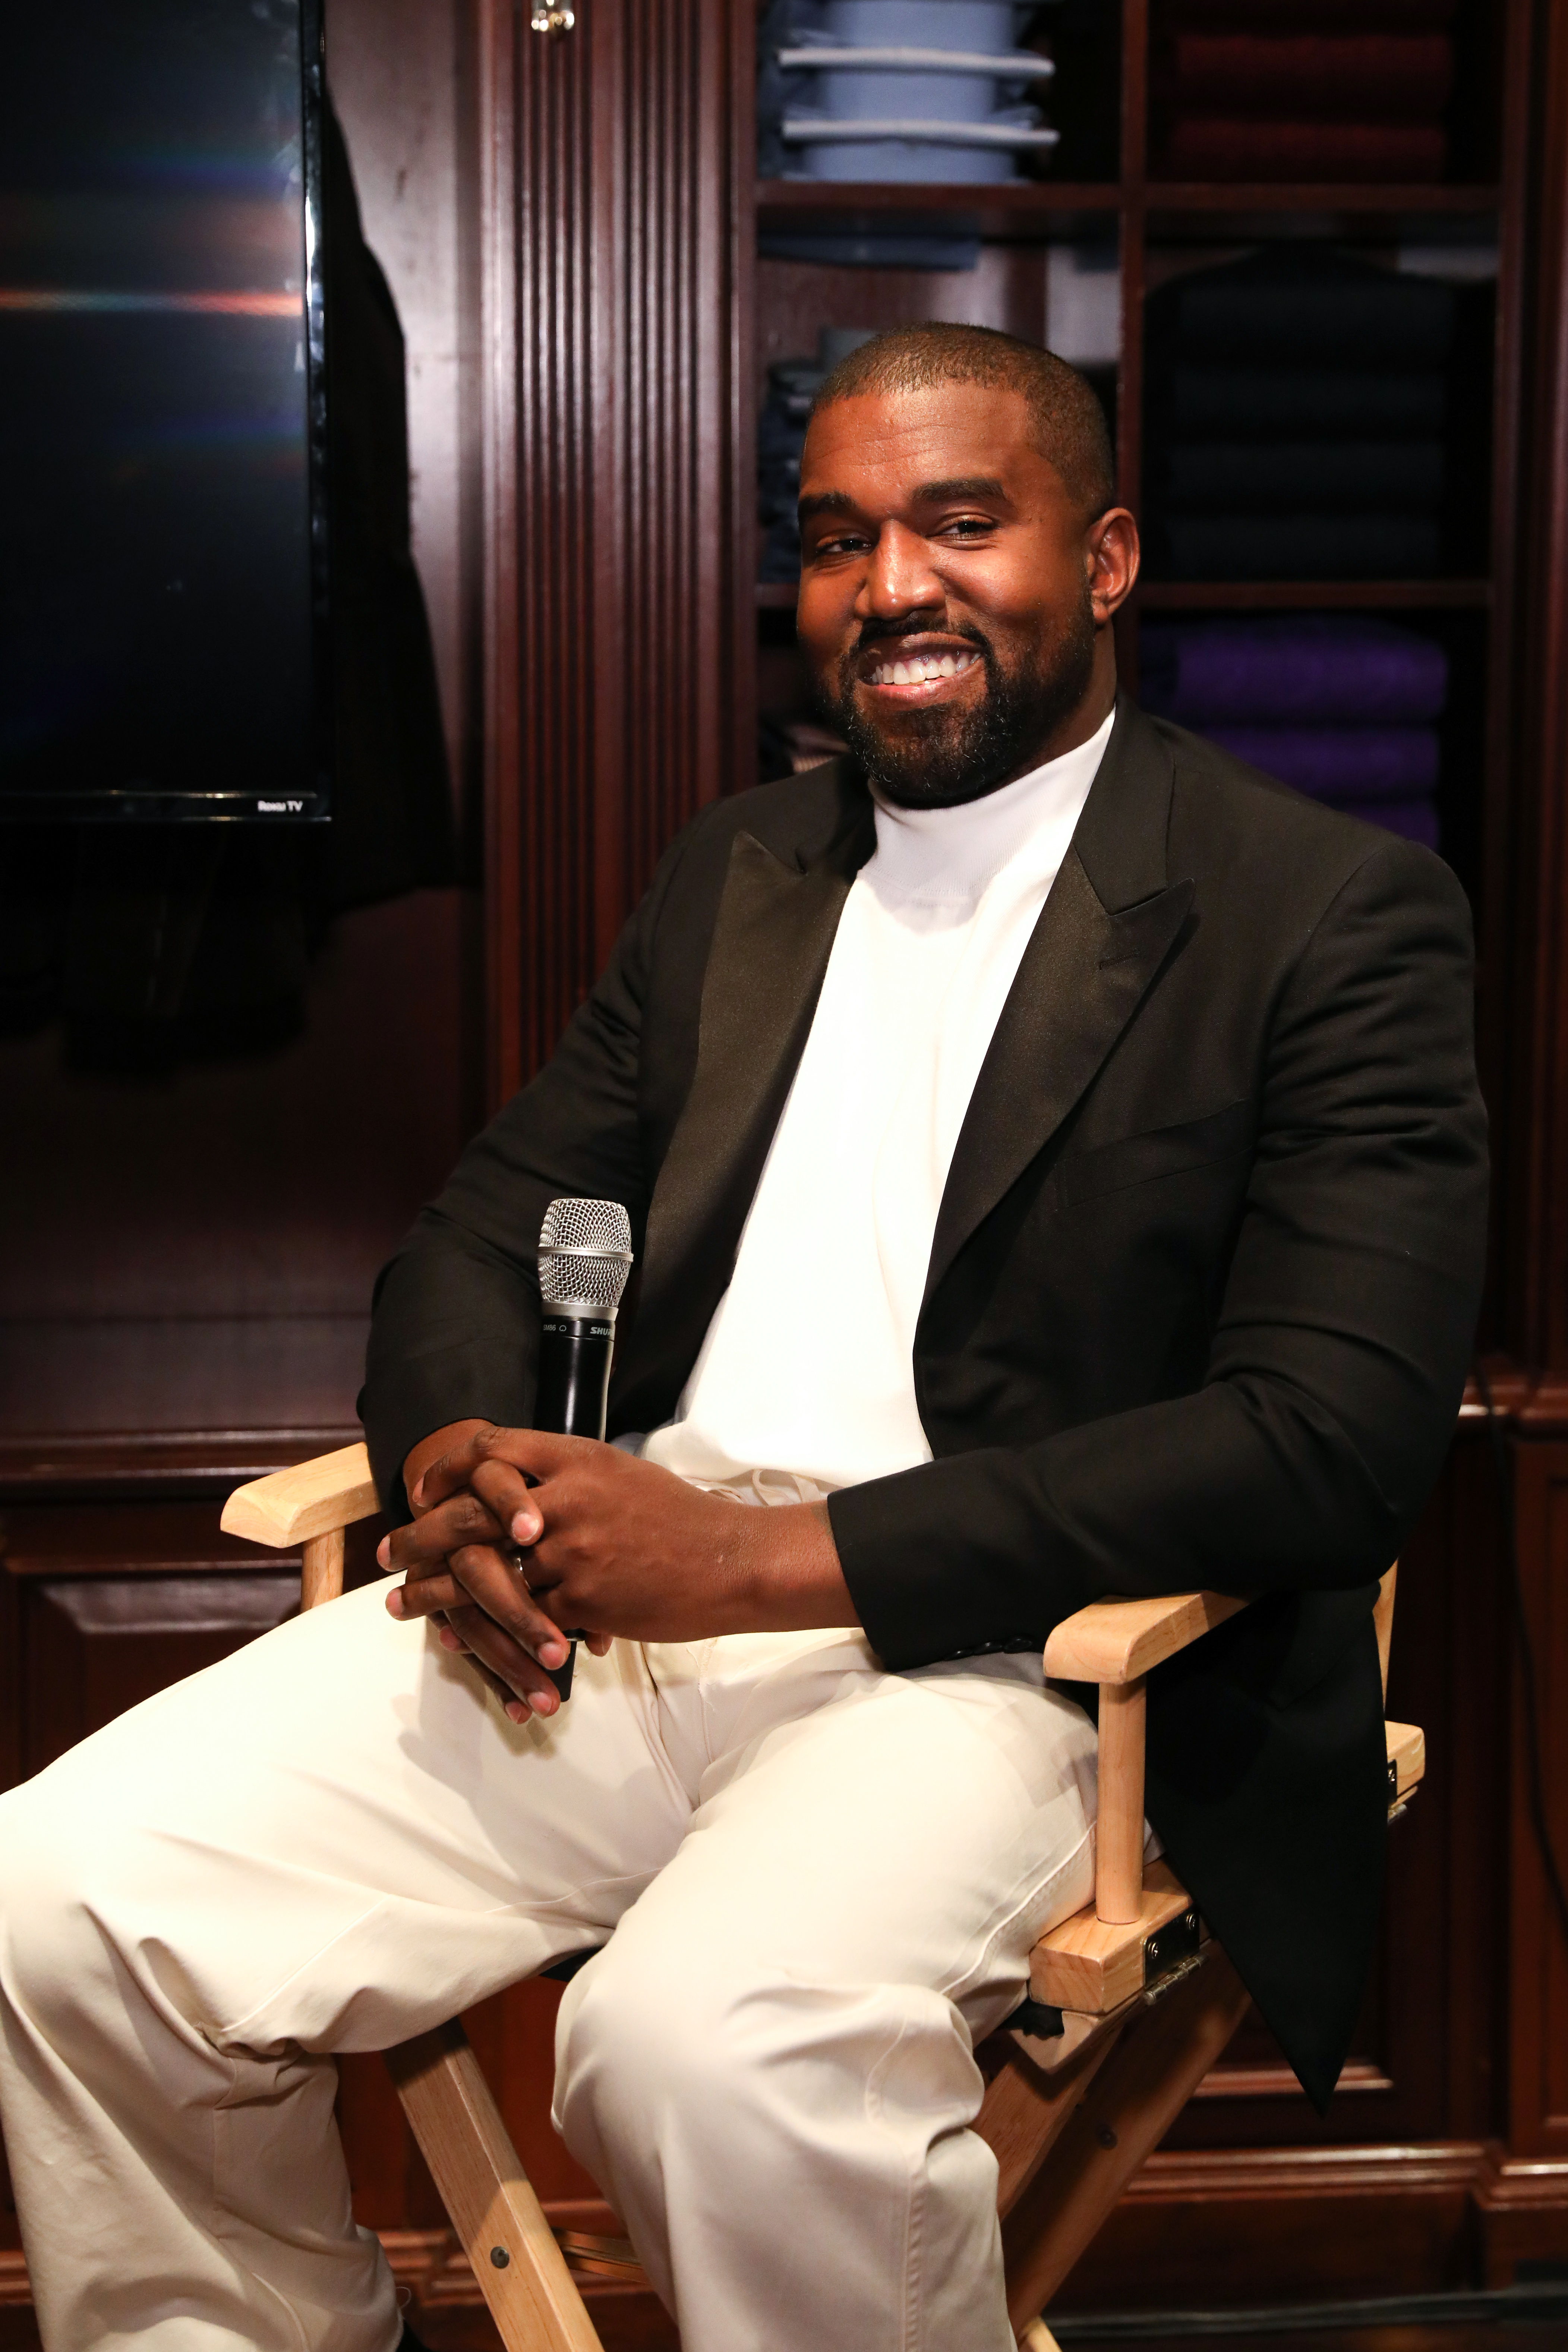 Kanye West attends Jim Moore Book Event At Ralph Lauren Chicago on October 28, 2019 in Chicago, Illinois. (Photo by Robin Marchant/Getty Images for Ralph Lauren)